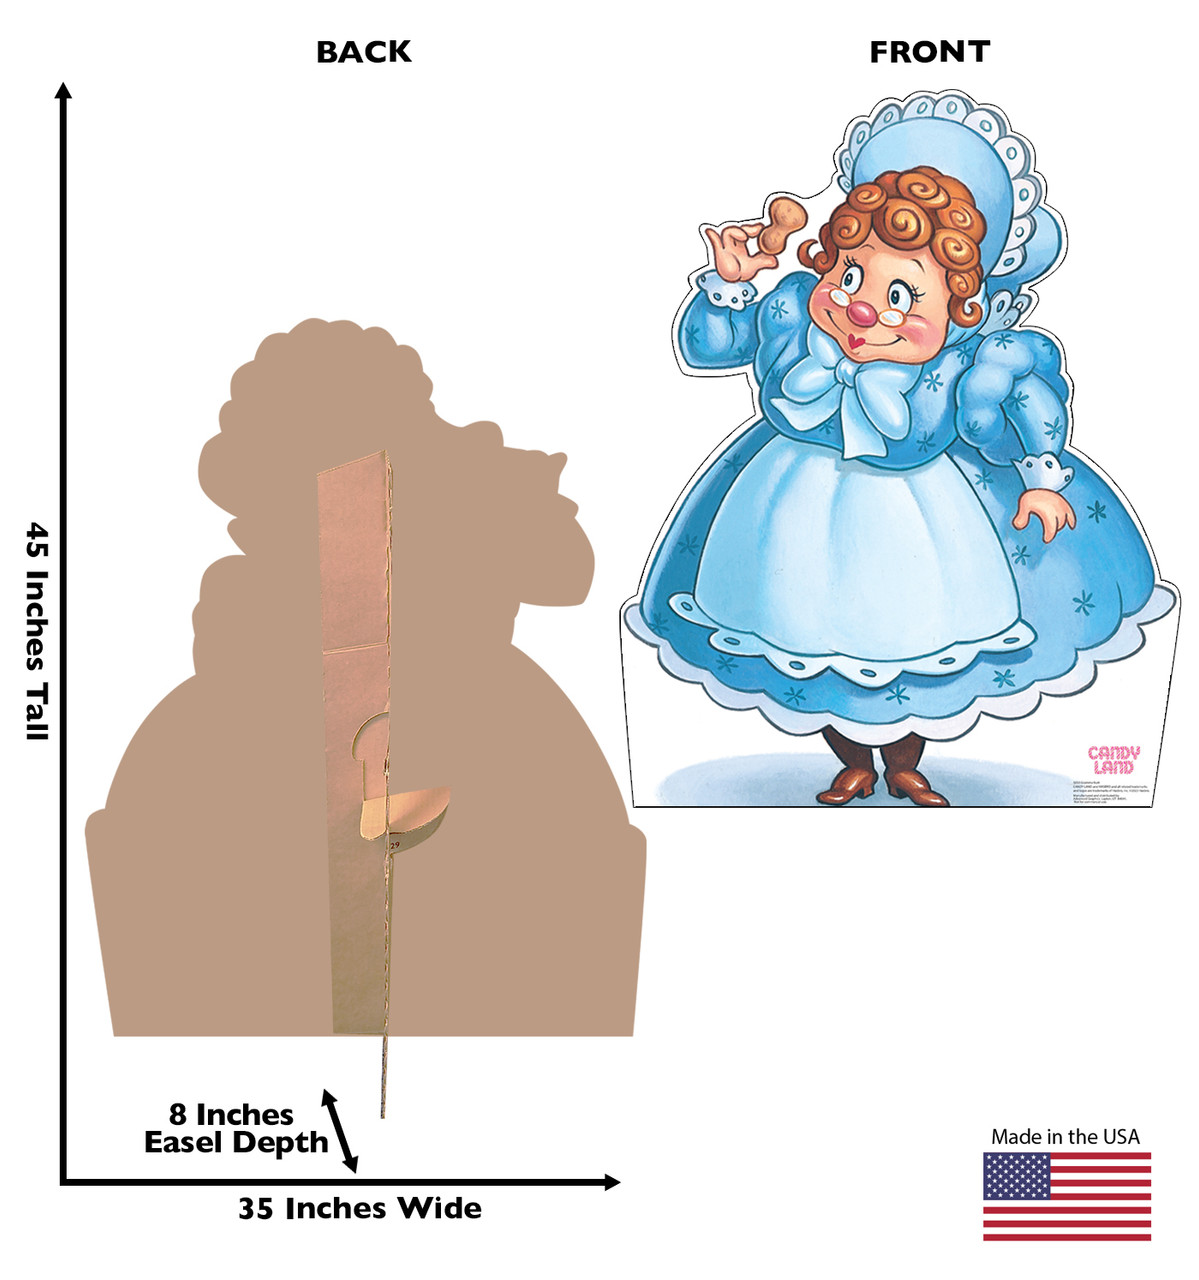 Life-size cardboard standee of Gramma Nutt from Candy Land with front and back dimensions.